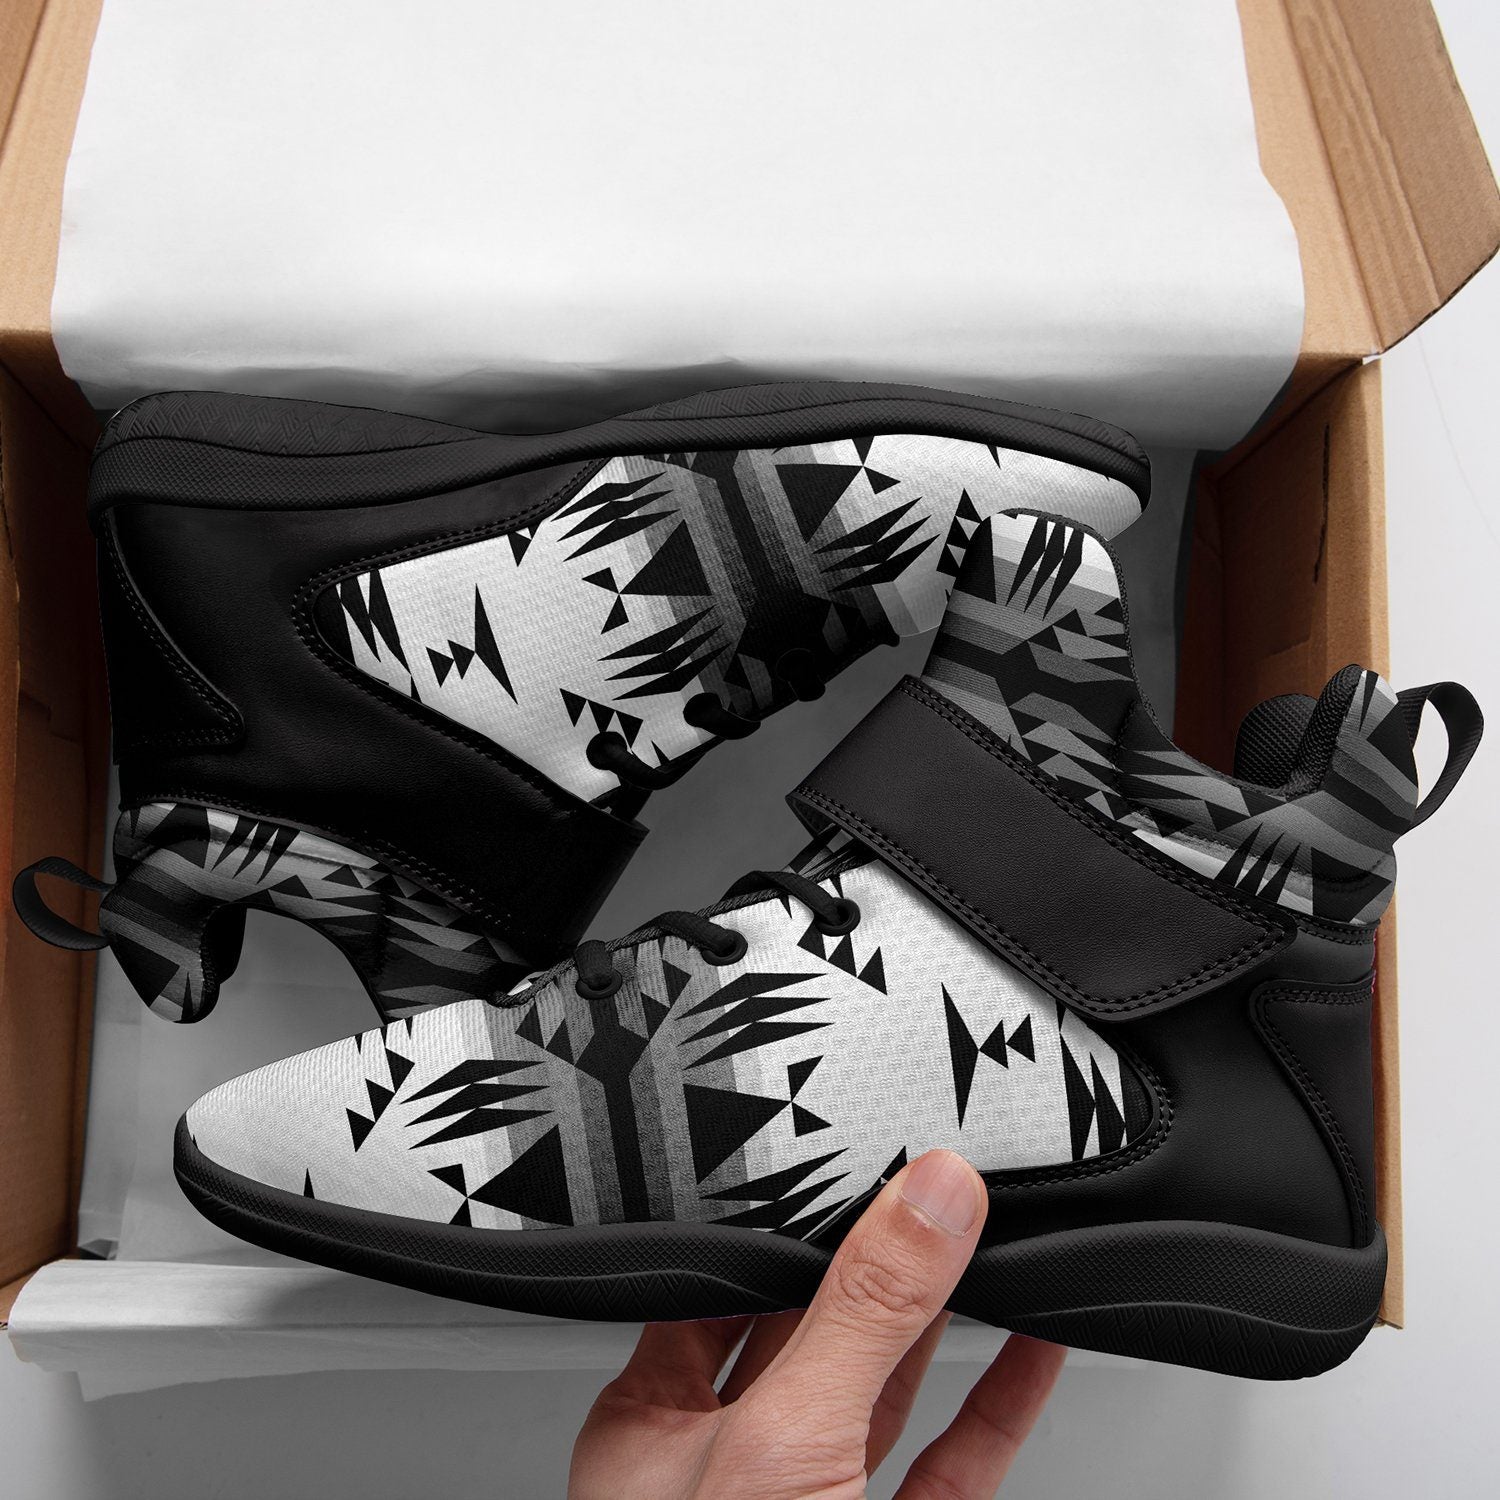 Between the Mountains White and Black Ipottaa Basketball / Sport High Top Shoes 49 Dzine 